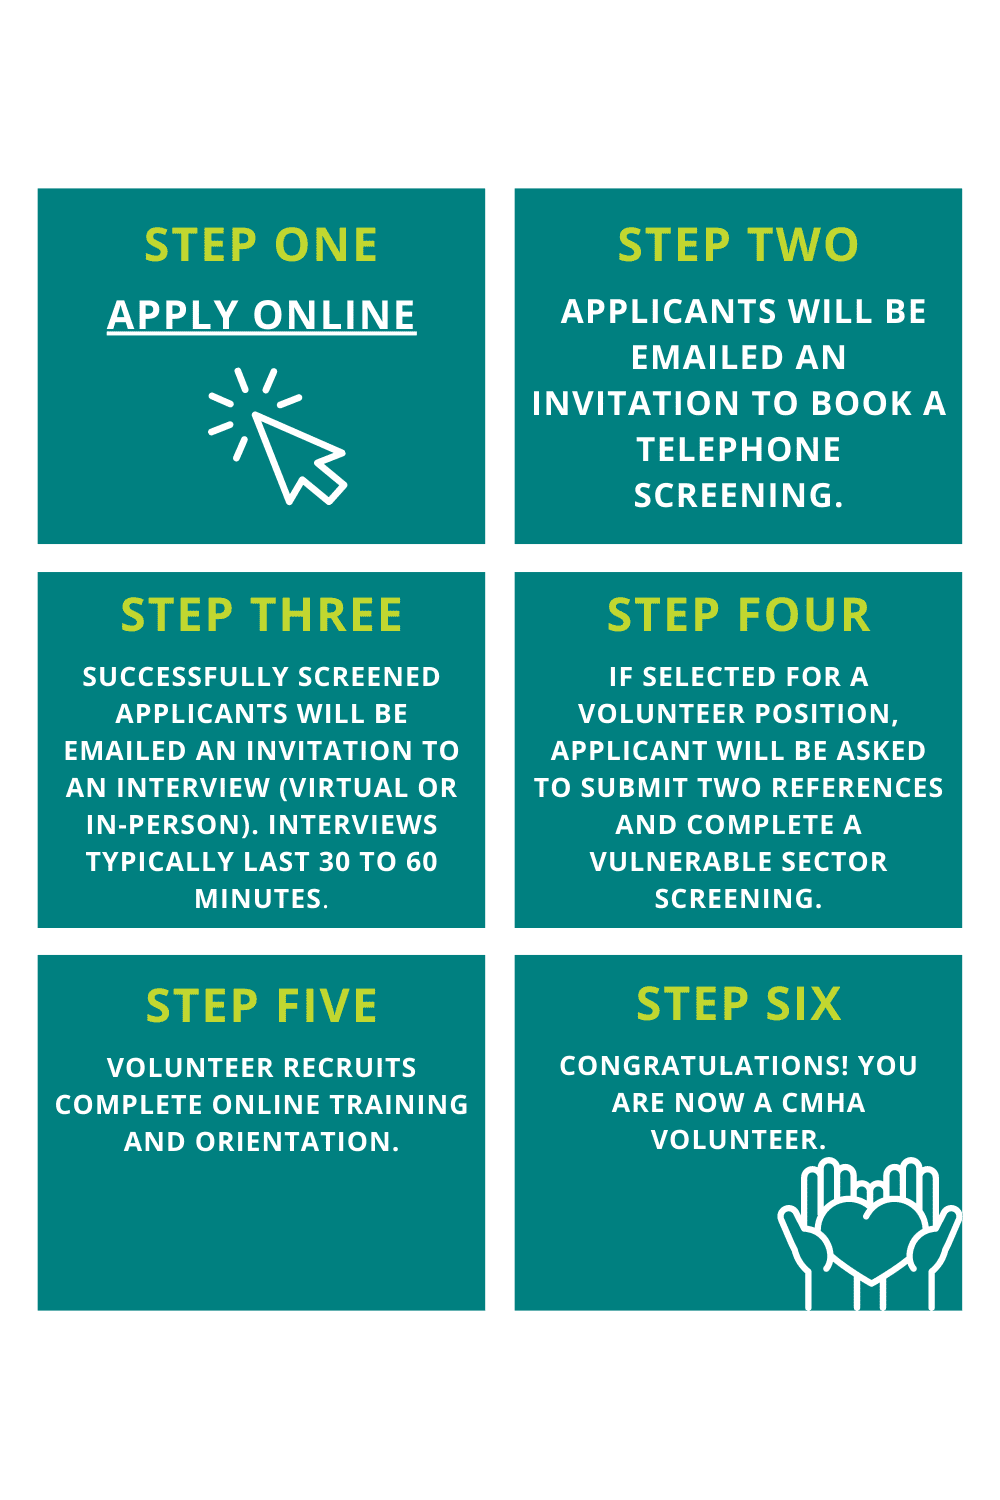 An infographic outlining the six steps to take to become a volunteer with the CMHA.